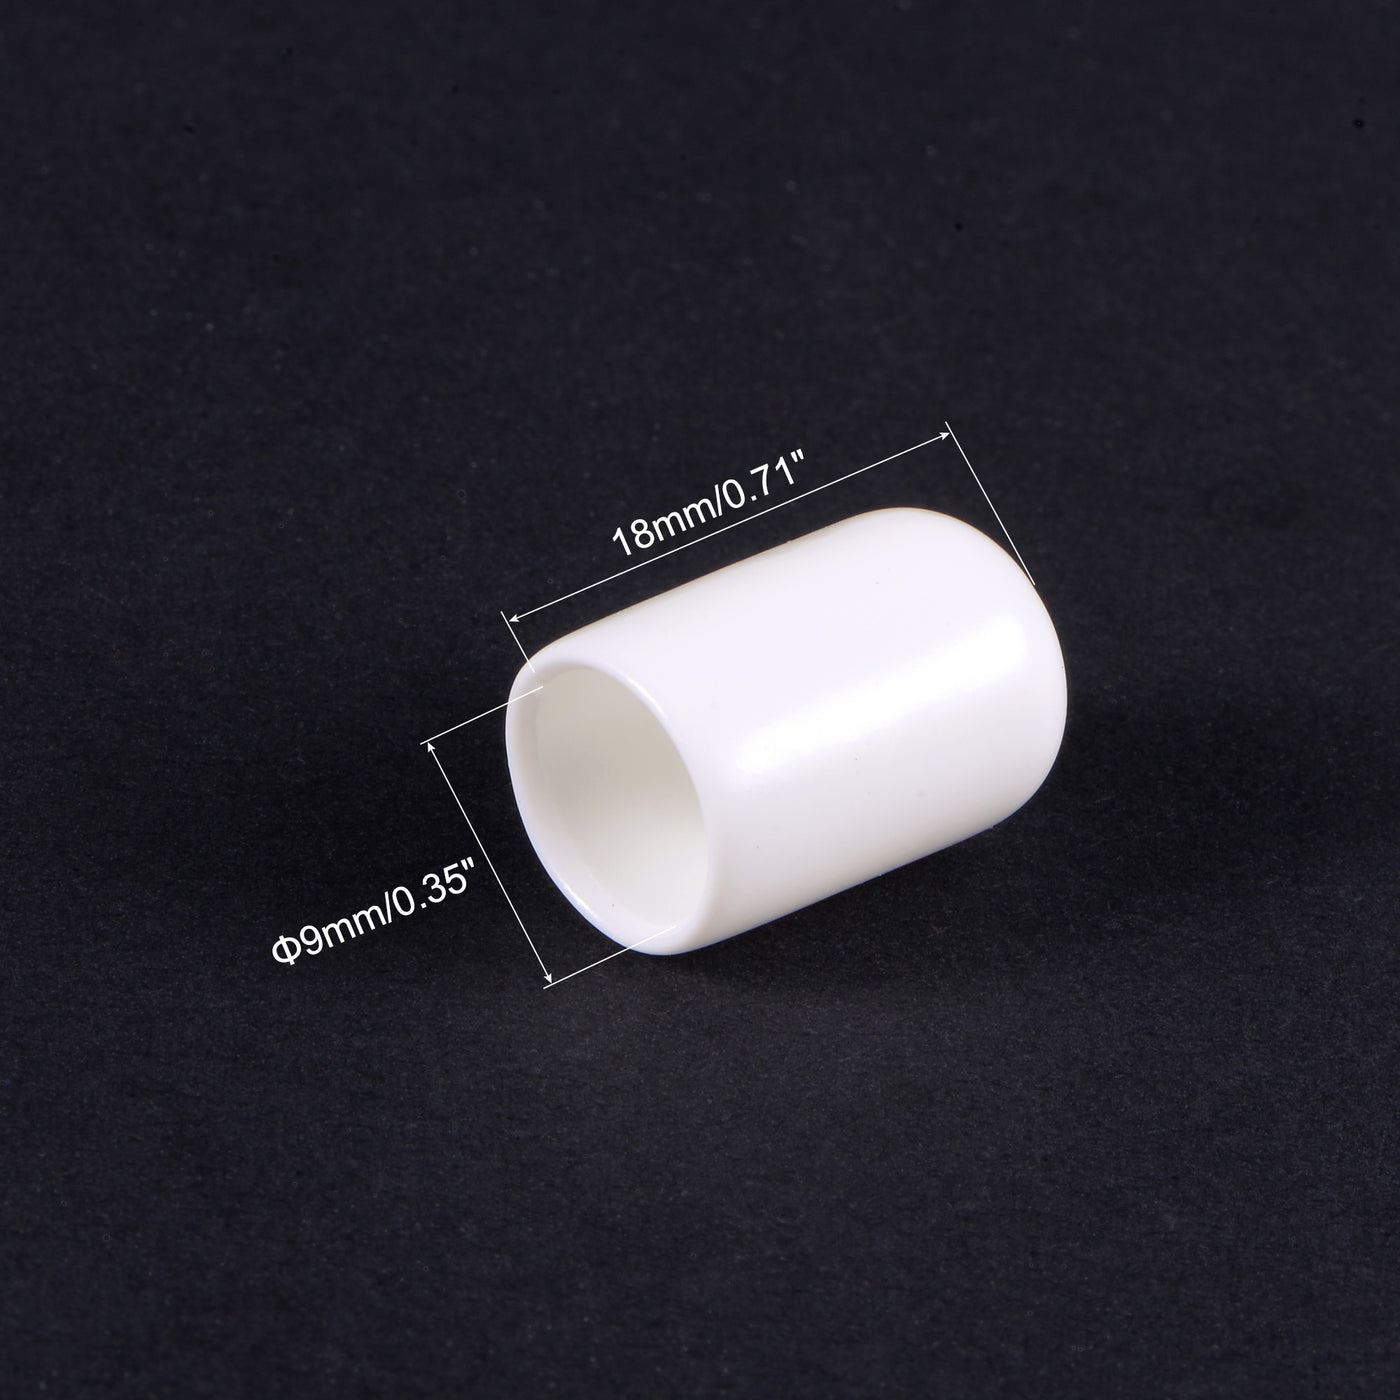 uxcell Uxcell Round Rubber End Caps Vinyl Cover Screw Thread Protectors